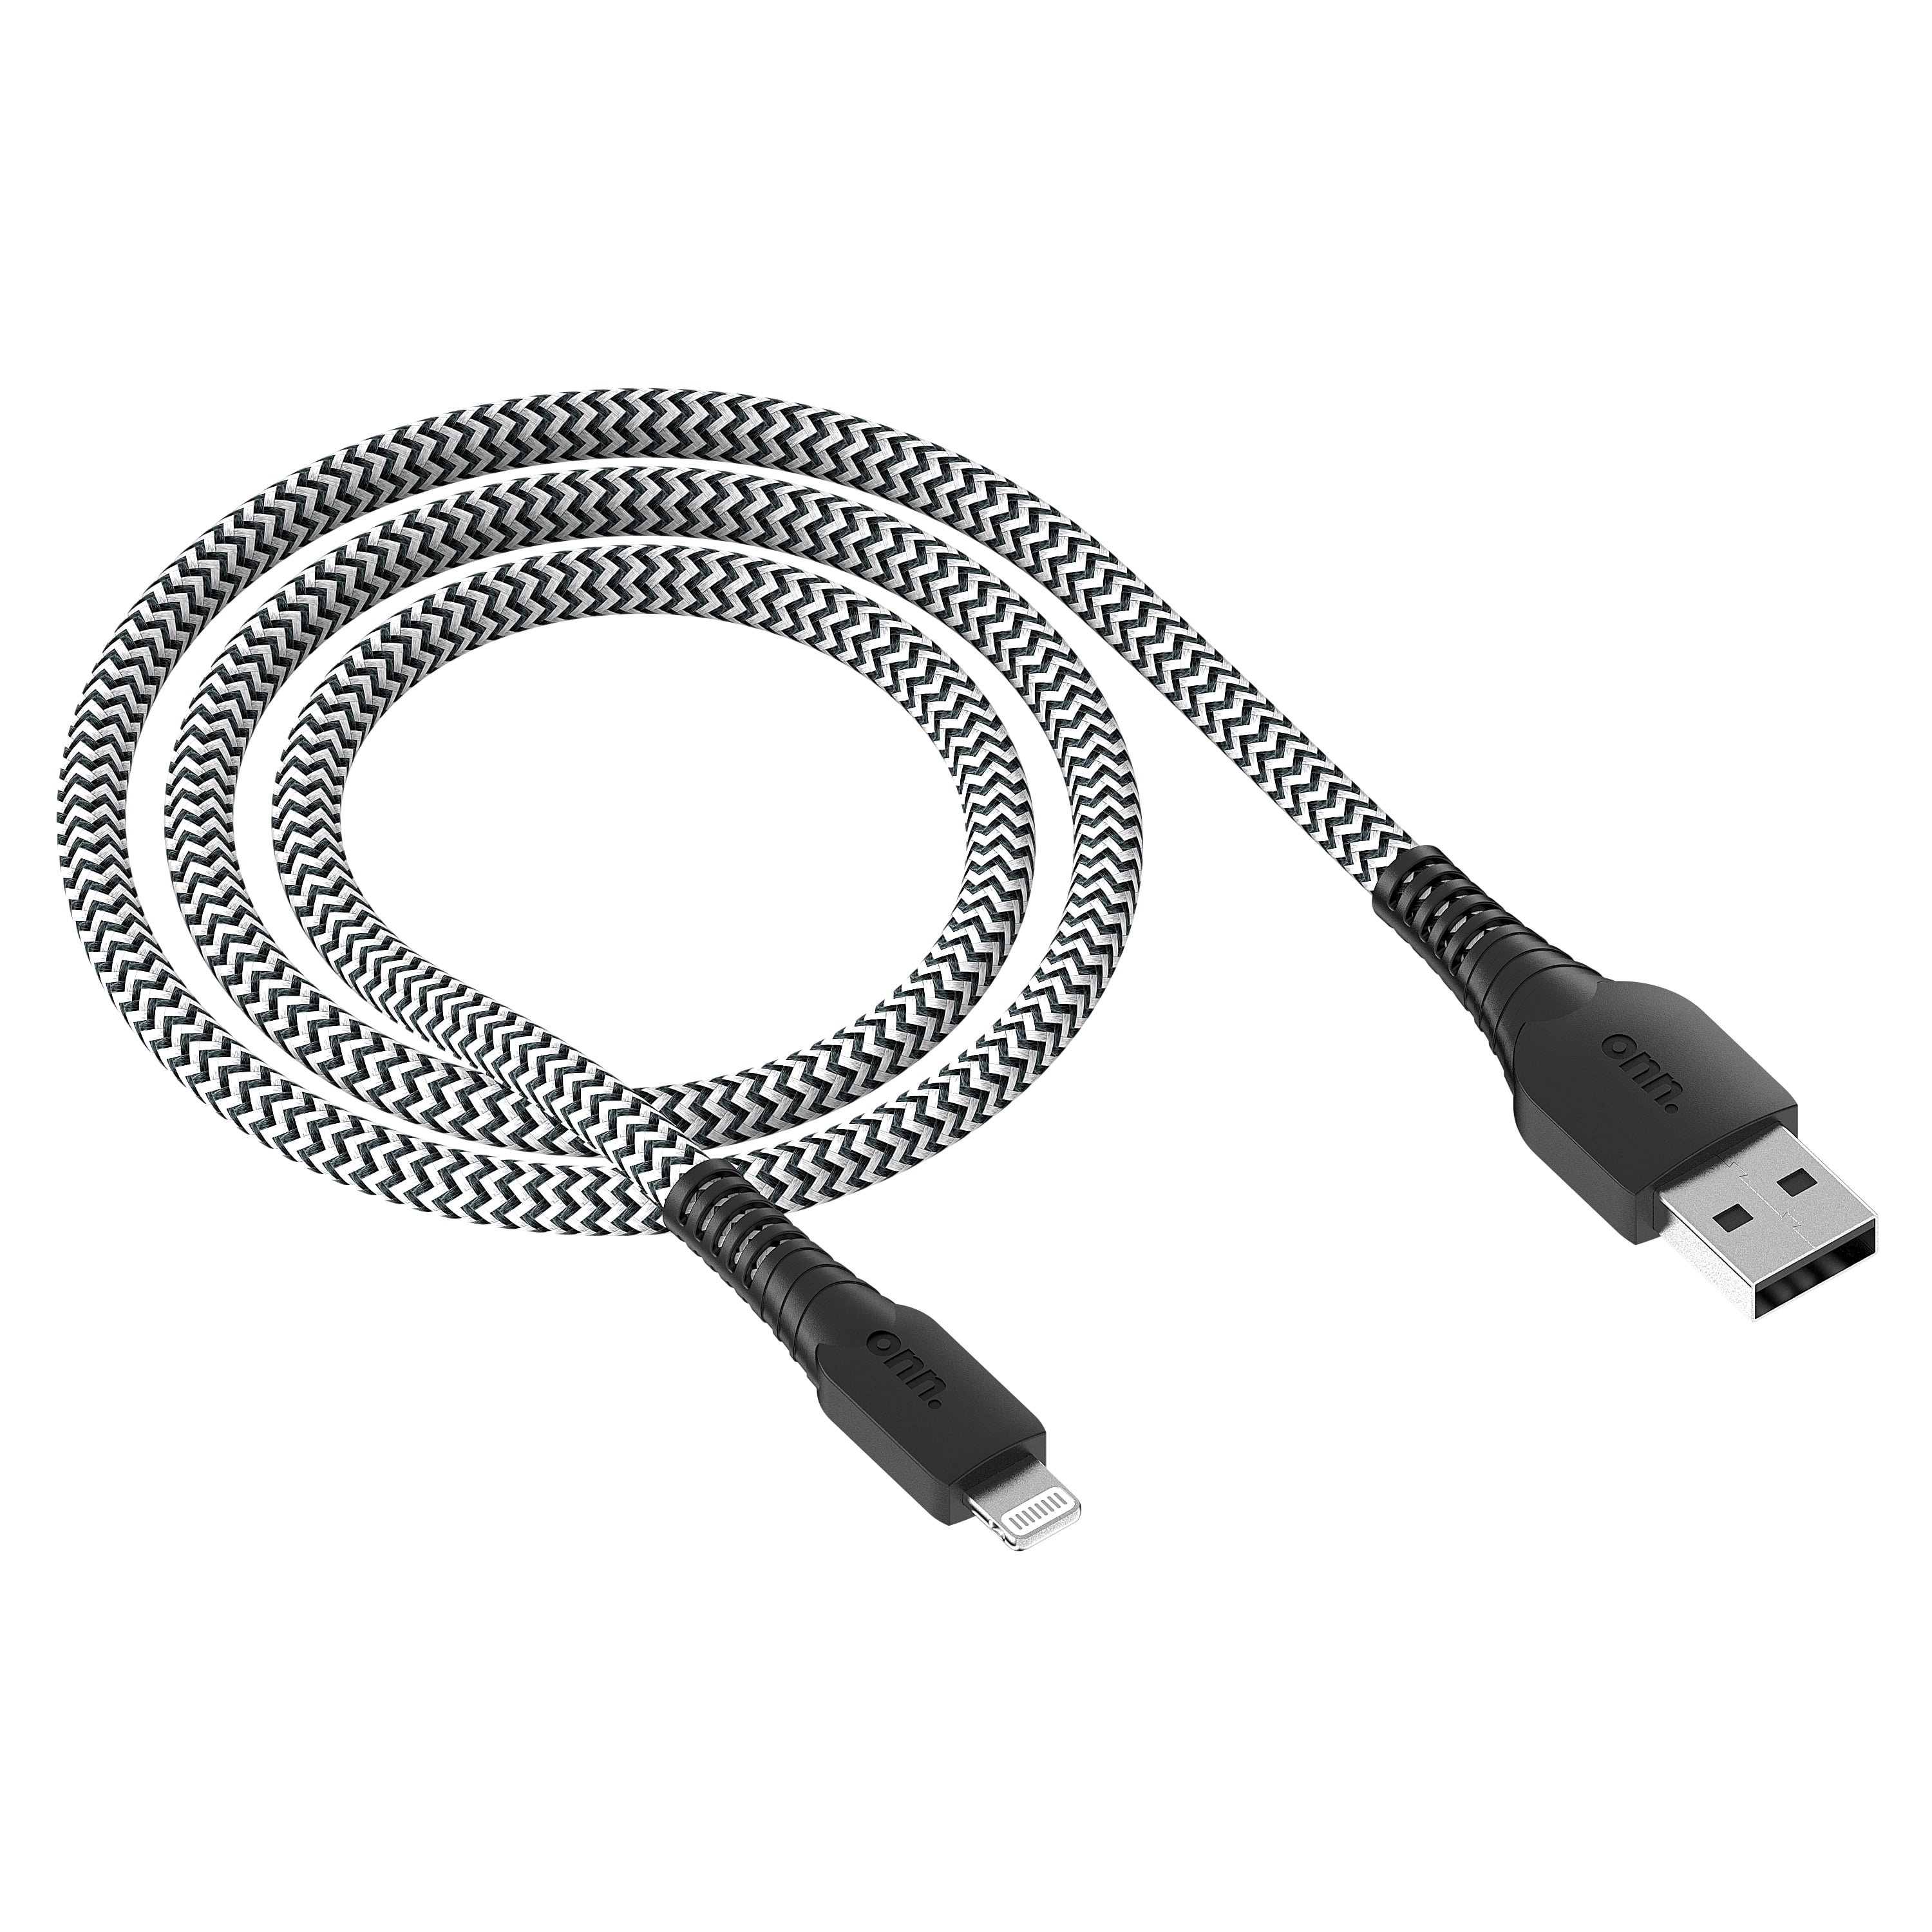 onn. 10' Lightning to USB Cable for iPhone/iPad/iPod, Black